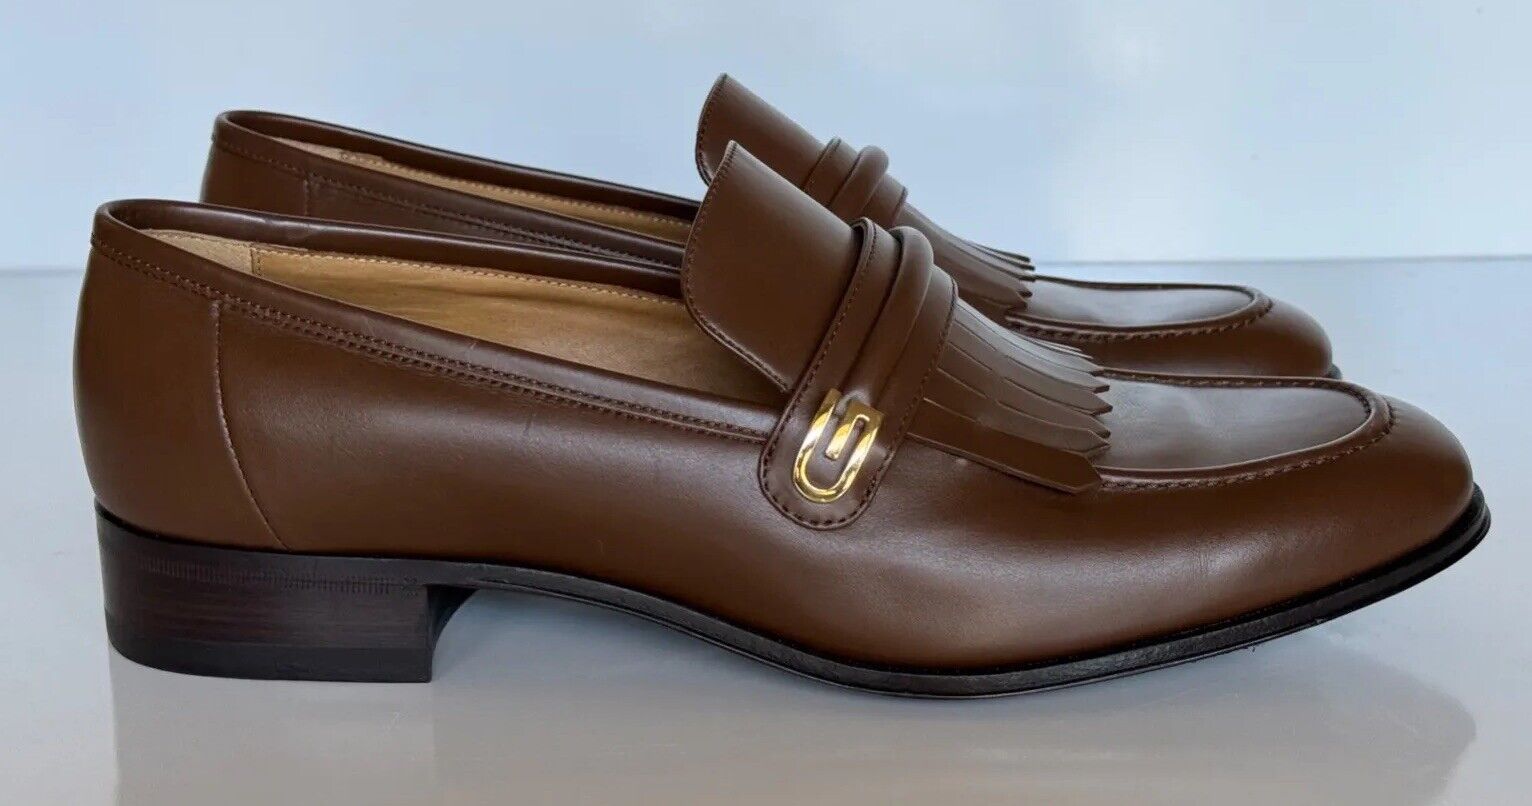 NIB Gucci Men’s Moccasin Leather Dress Shoes Brown 11.5 US (10.5 Gucci) 714680